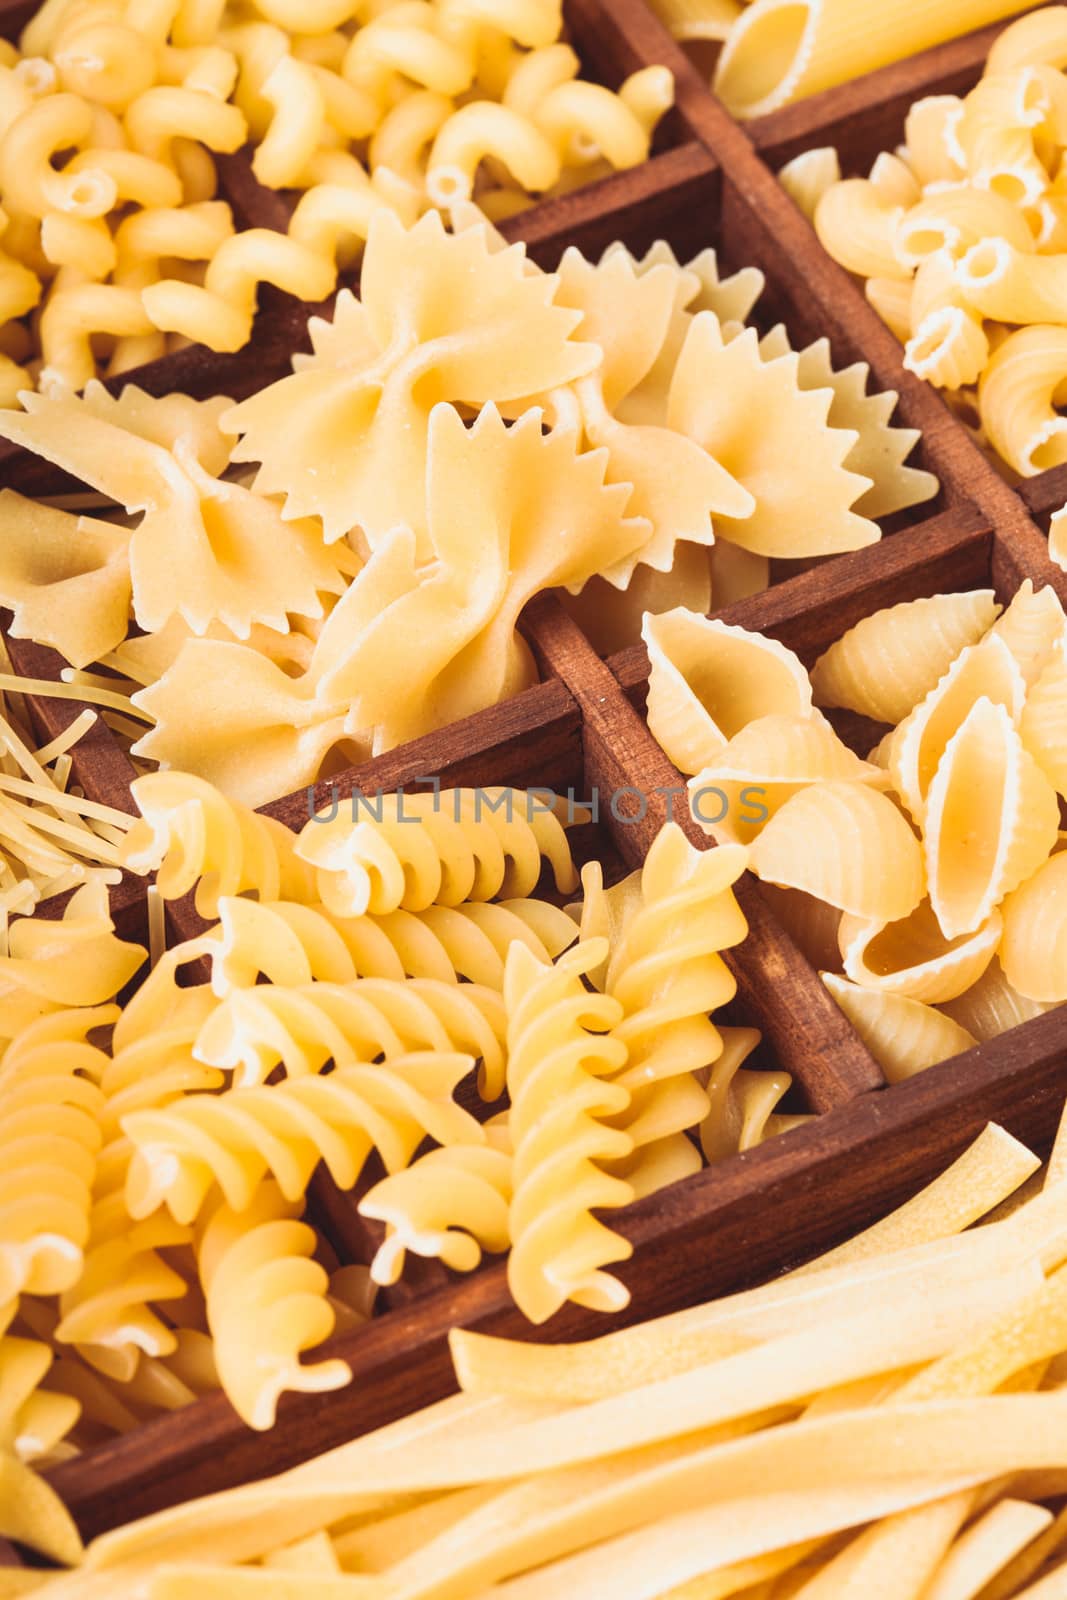 Various pasta  types in the wooden box on the table